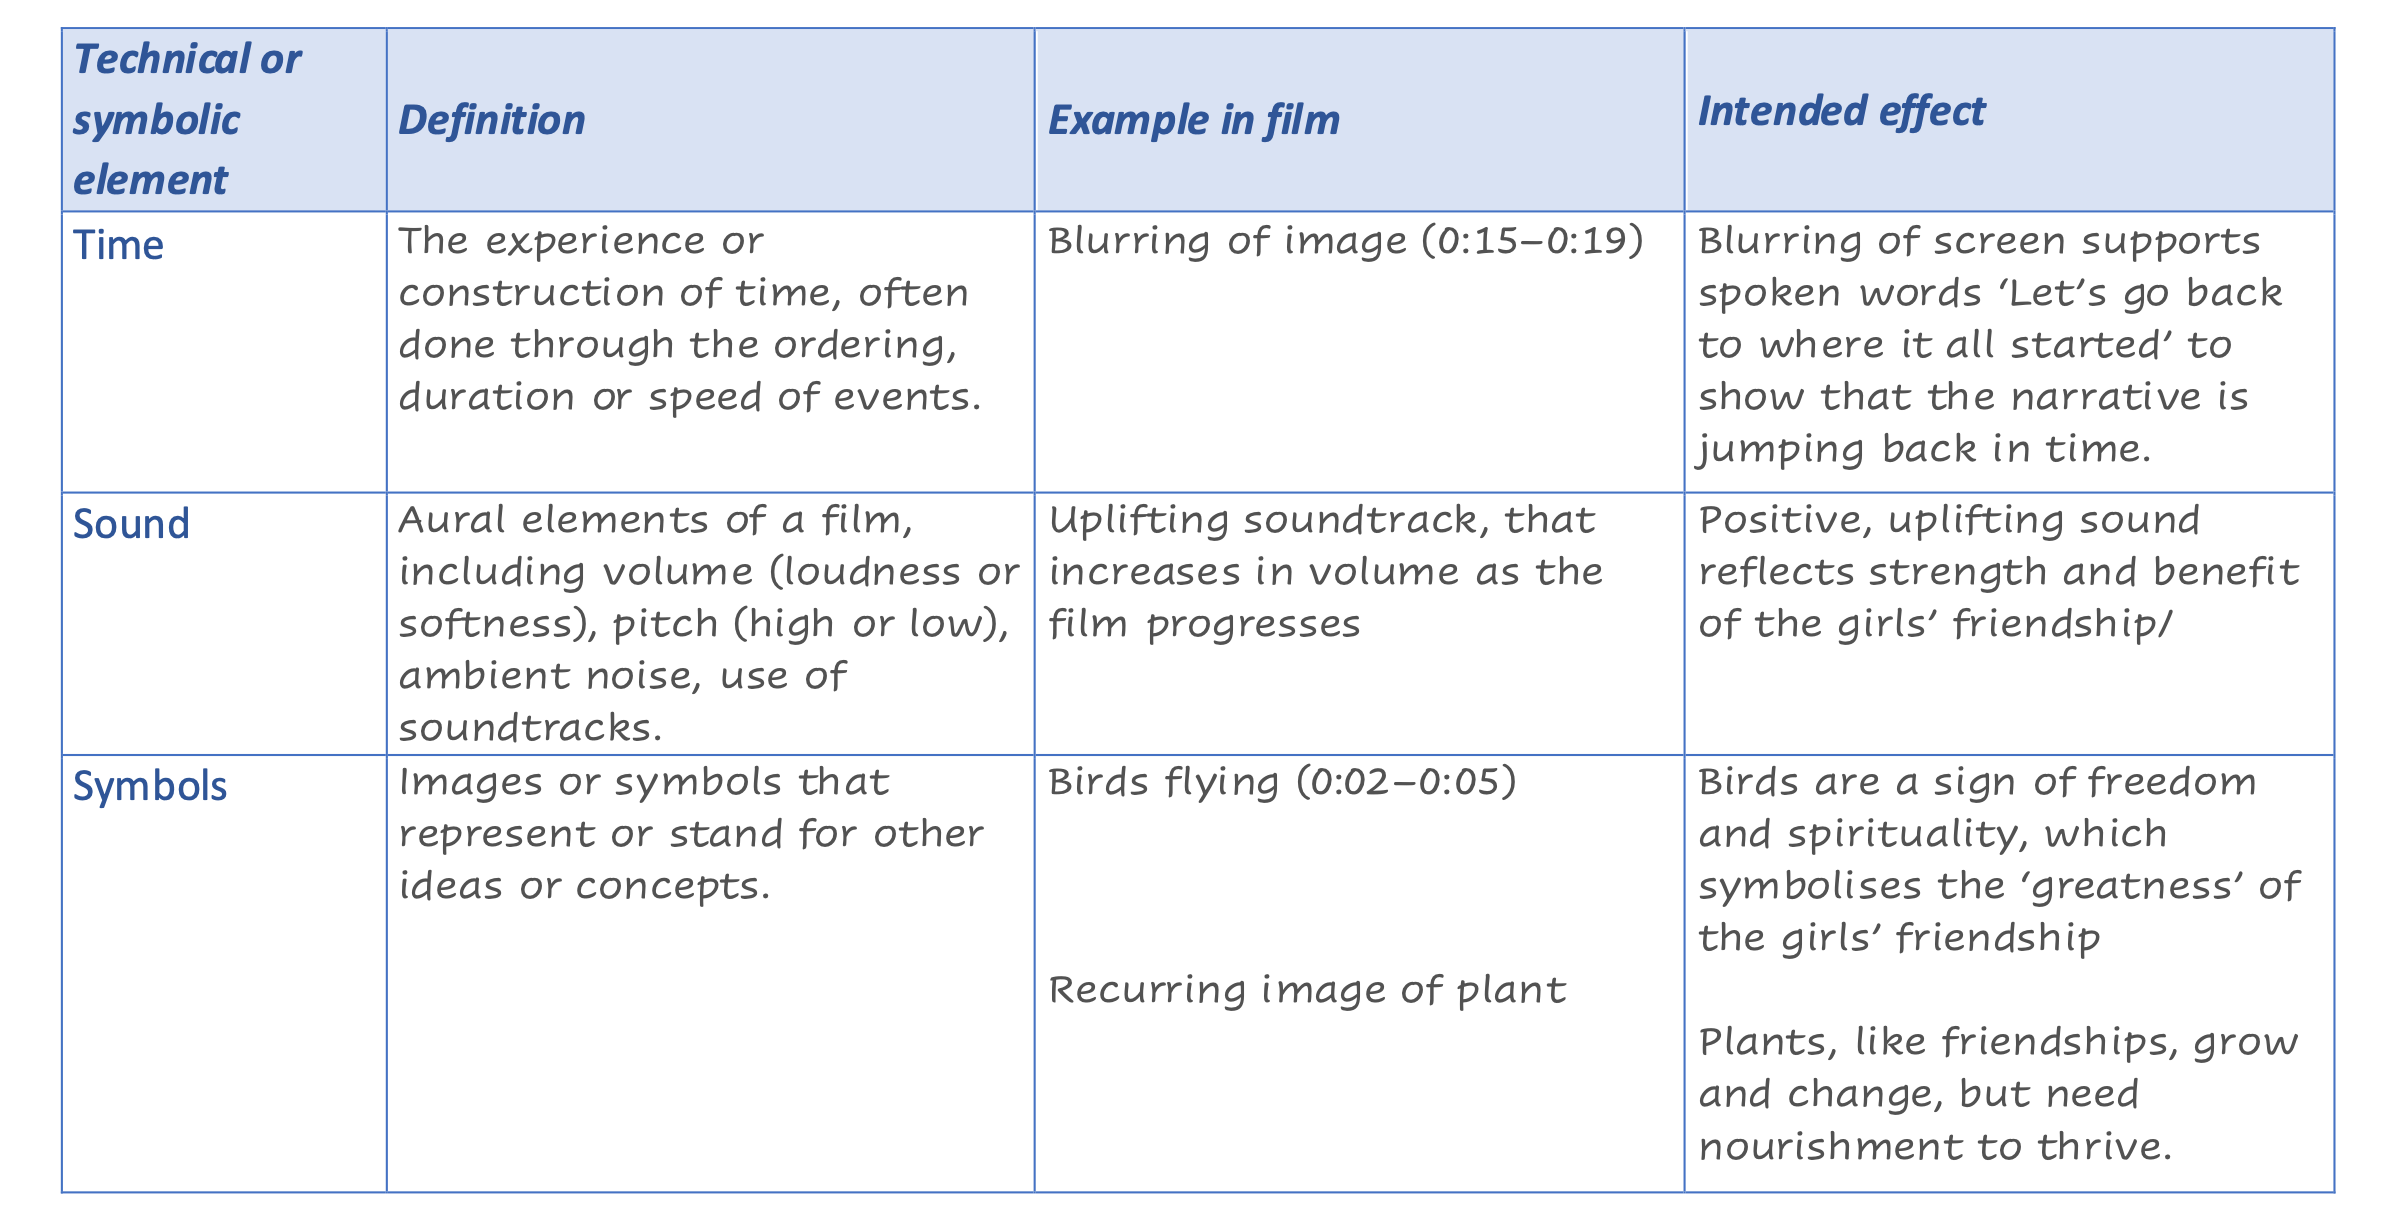 a completed table defining three technical and symbolic elements, with examples from the short film 'Loyalty to Me' and an explanation of the intended effects. Time, sound, and symbols are the three elements that have been listed. For time, the student has defined it as 'the experience or construction of time, often done through the ordering, duration or speed of events. The example in the film is blurring of the image from 15 to 19-second mark in the film. The intended effect is 'blurring of screen supports spoken words 'let's go back to where it all started' to show that the narrative is jumping back in time'.